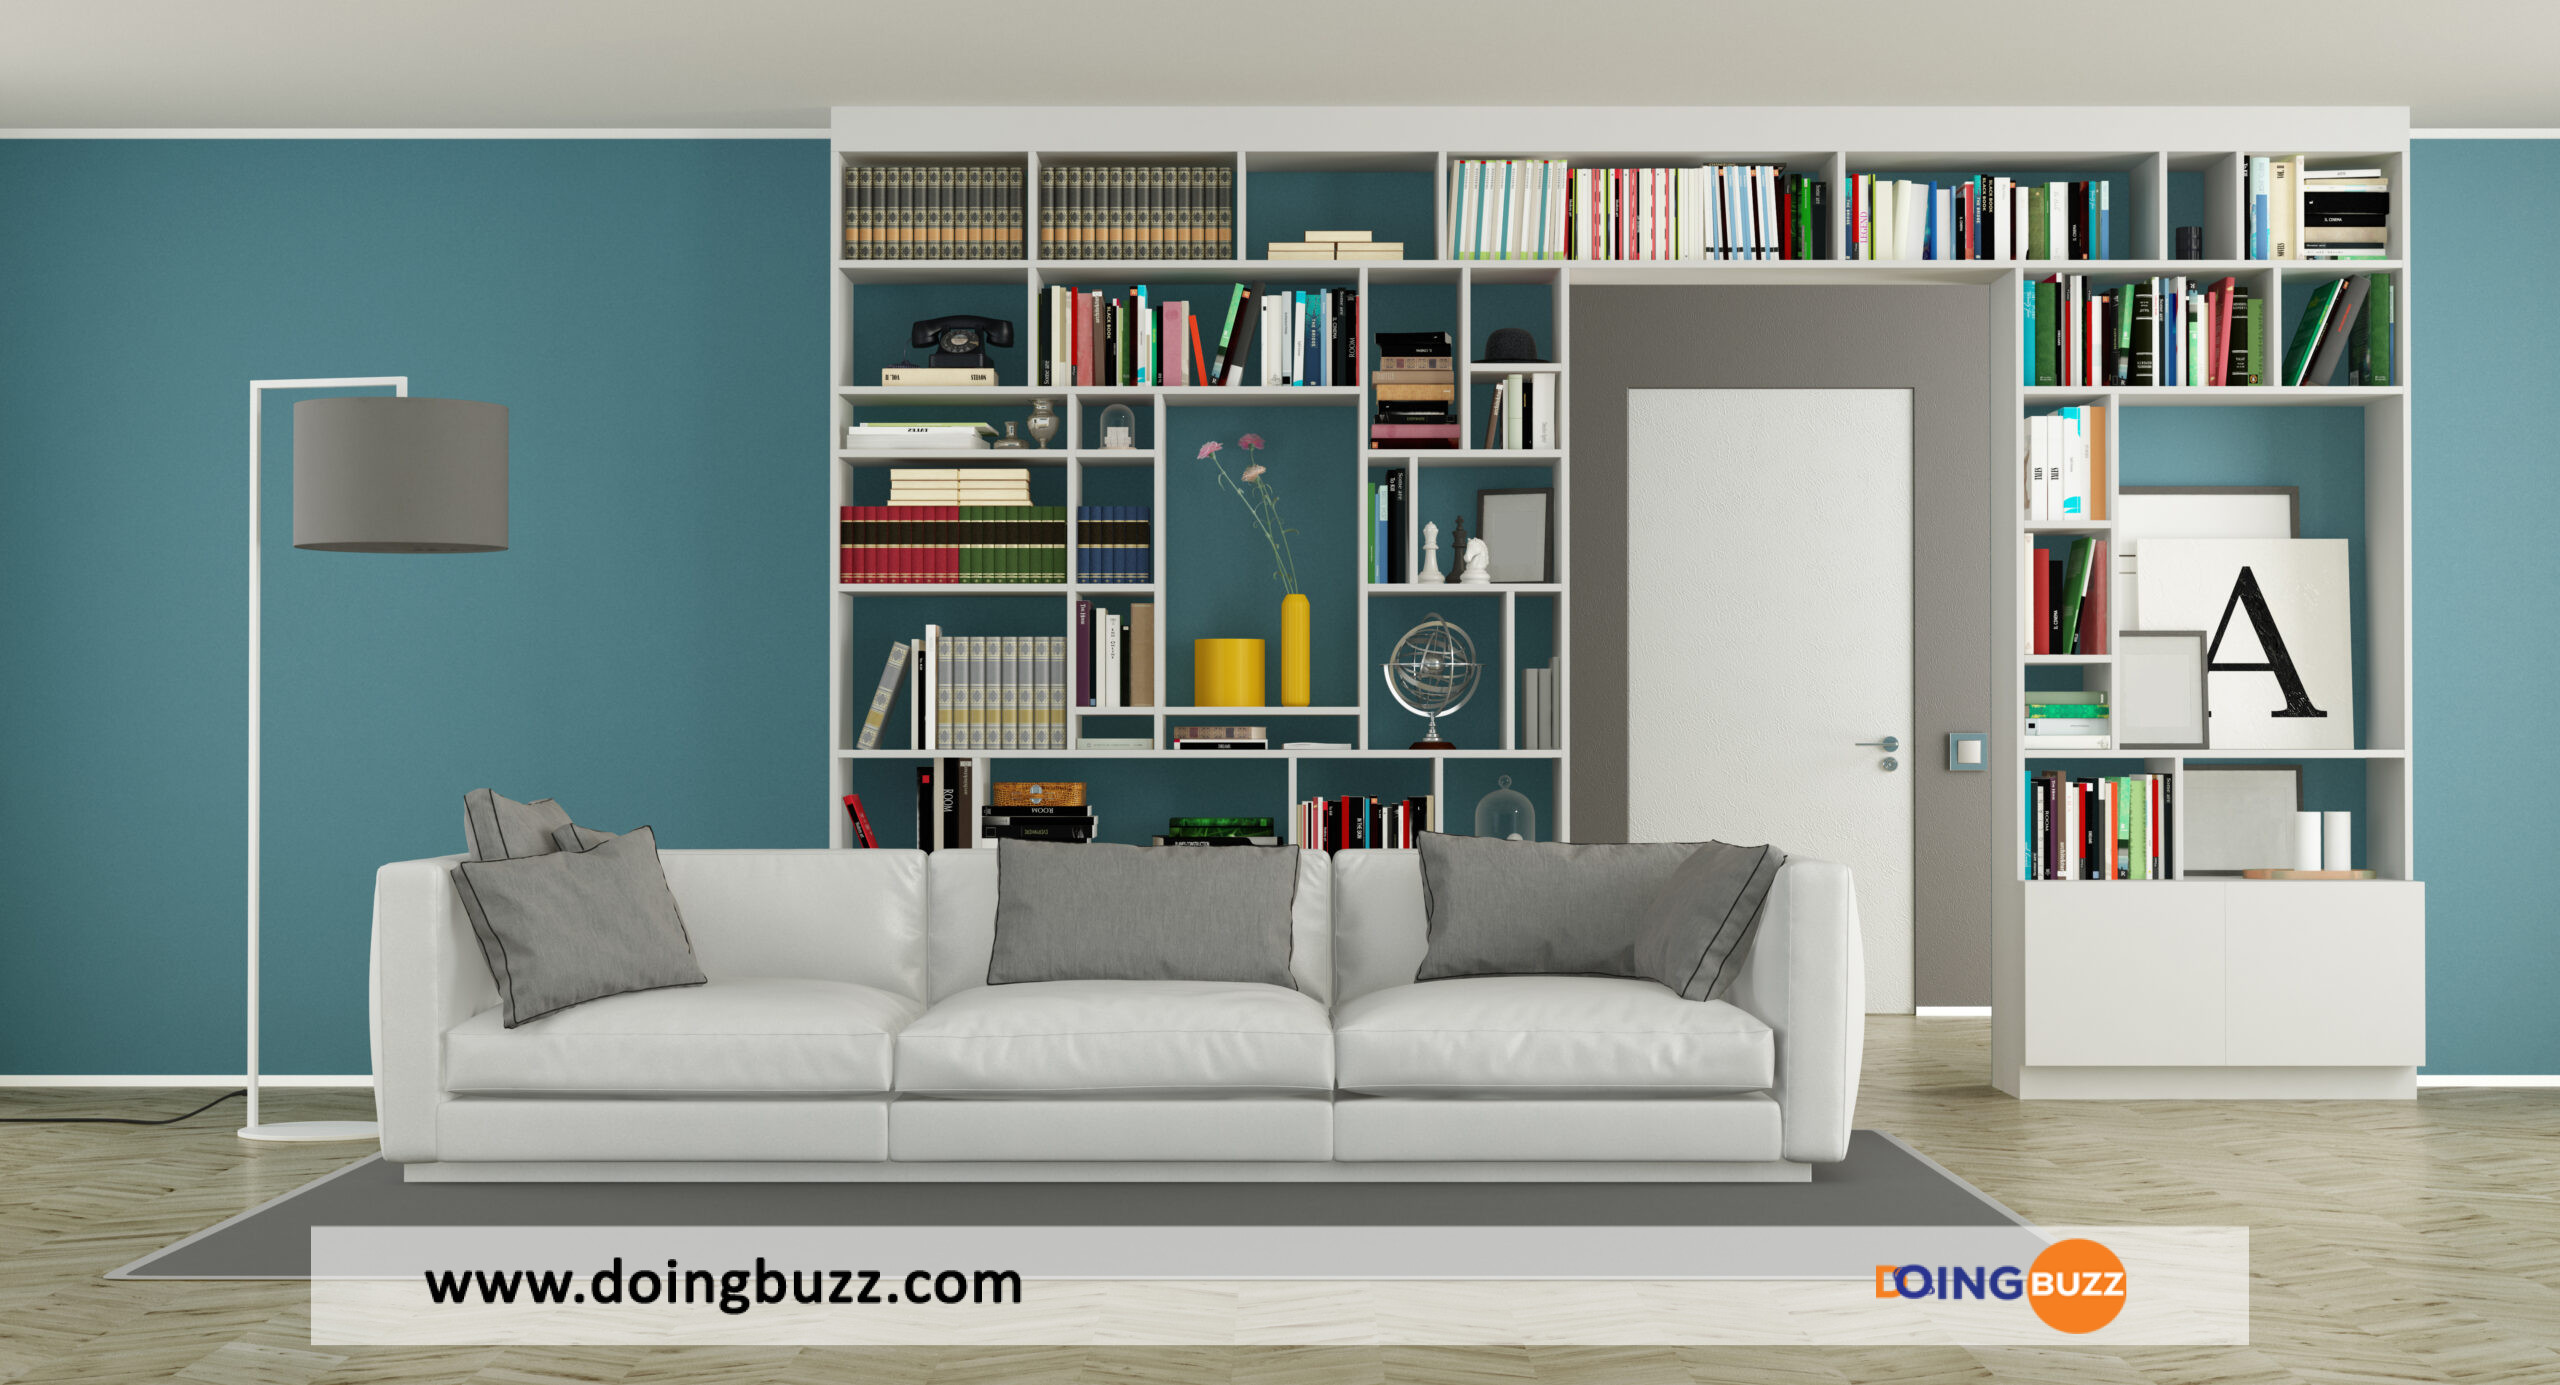 Modern Living Room With Bookcase 2021 08 26 15 32 52 Utc Scaled